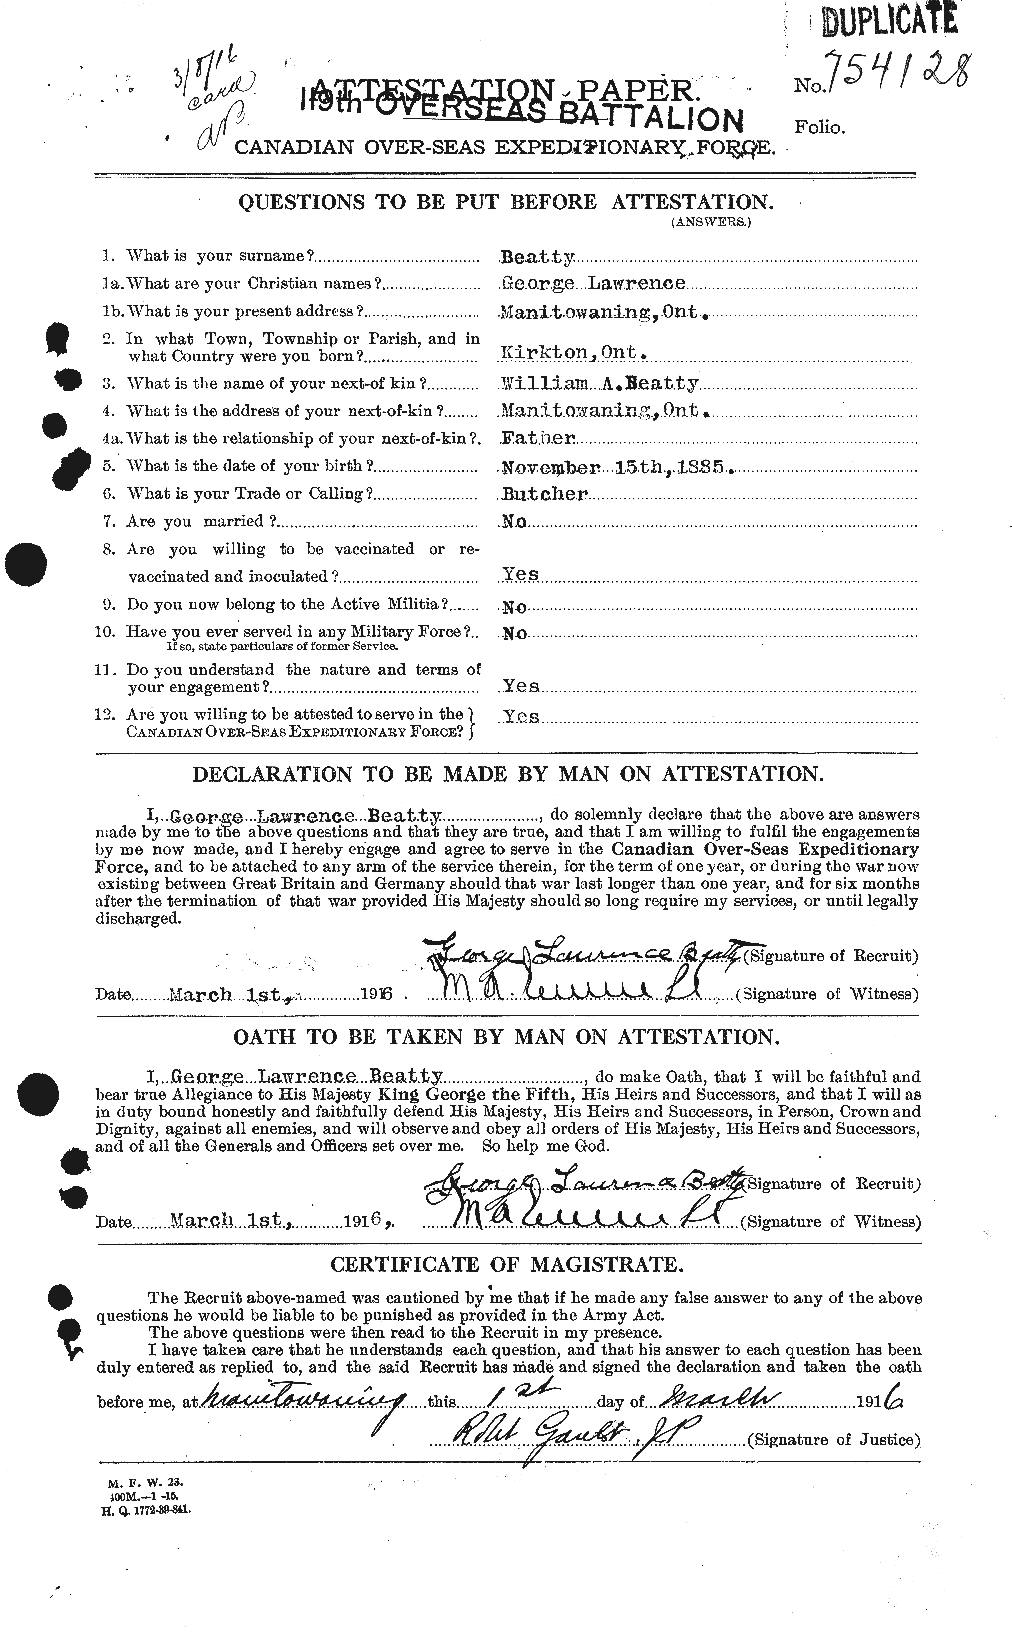 Personnel Records of the First World War - CEF 236374a